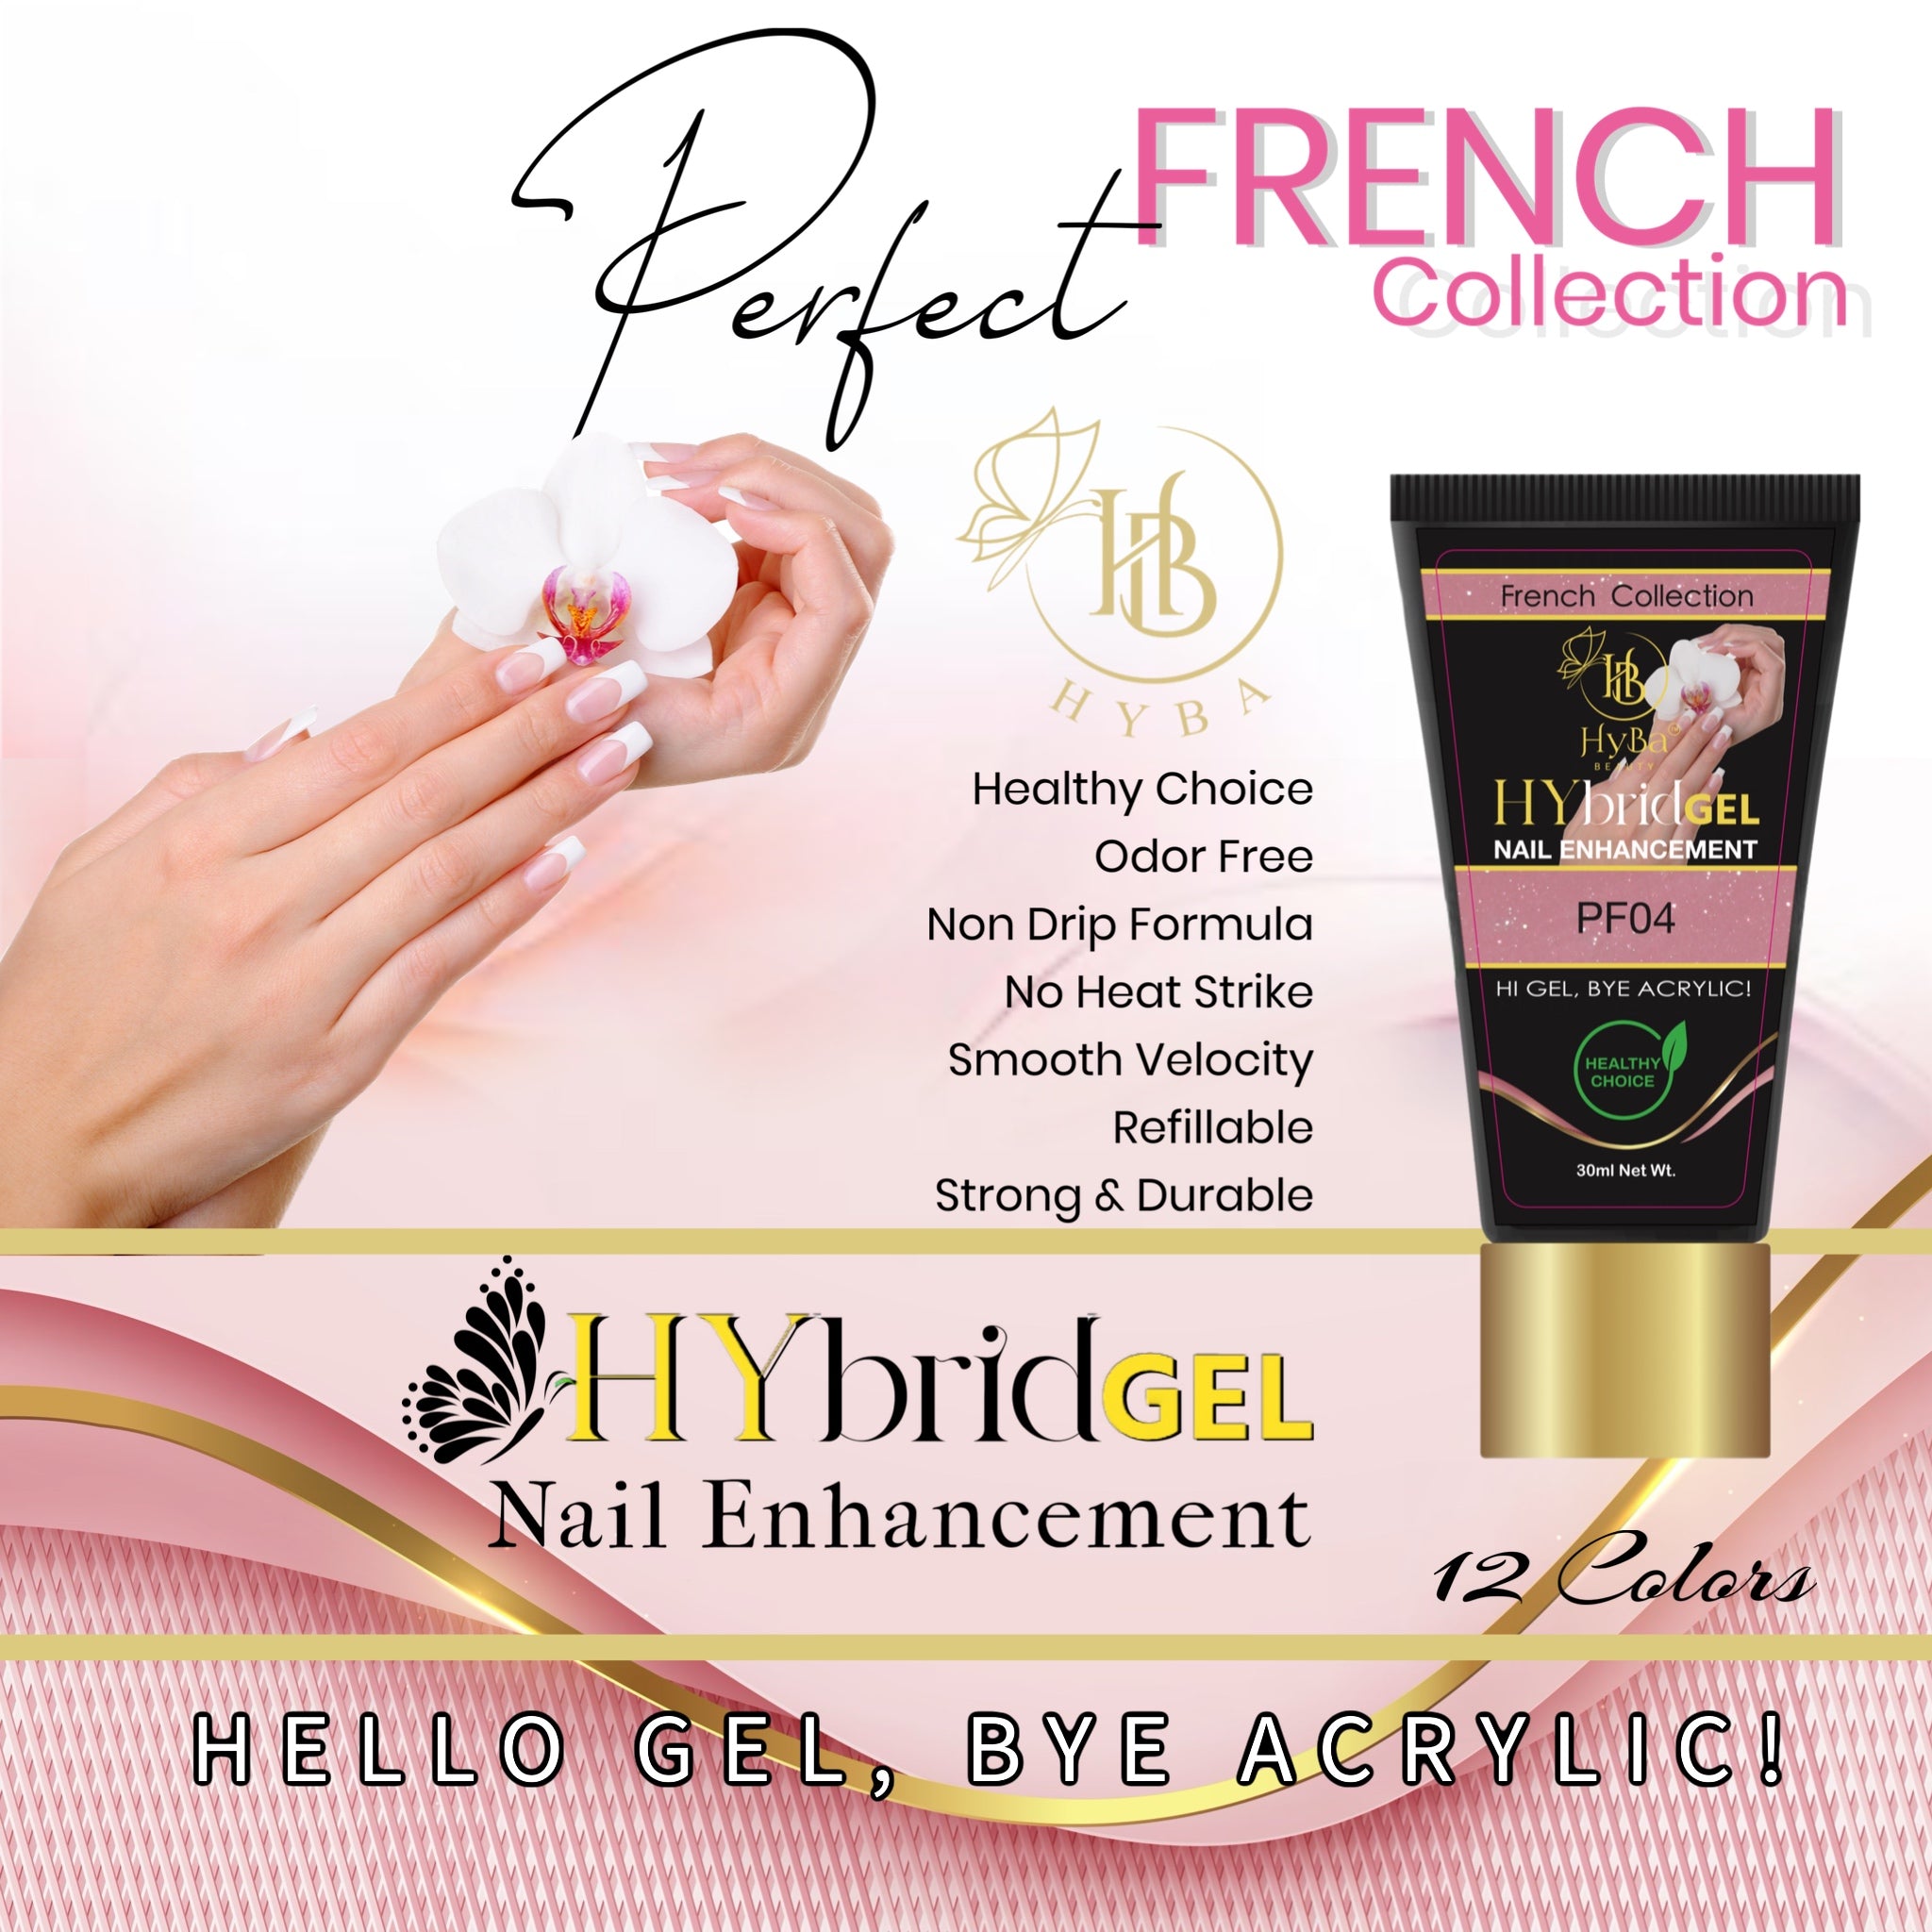 HB- Hybrid Gel "Perfect FRENCH" Collection 